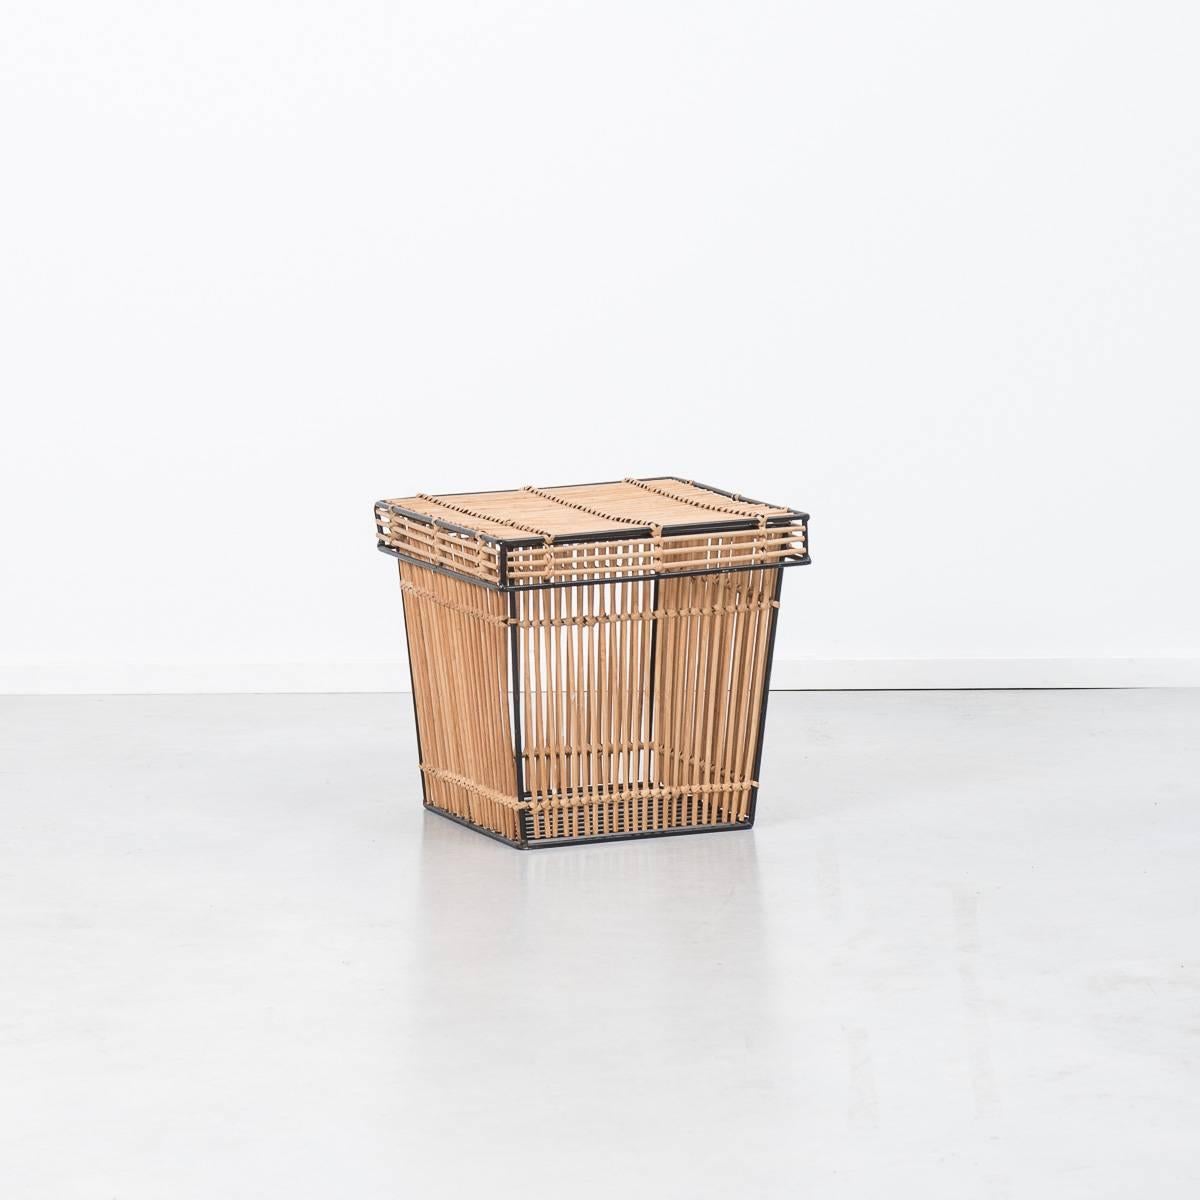 This lovely wicker and steel basket by Rohé Noordwolde has a tapered box and squared lid. It would look great with magazines in it or even a plant. It’s simple construction and shape made it a classic Dutch household accessory of at the time. Rohé